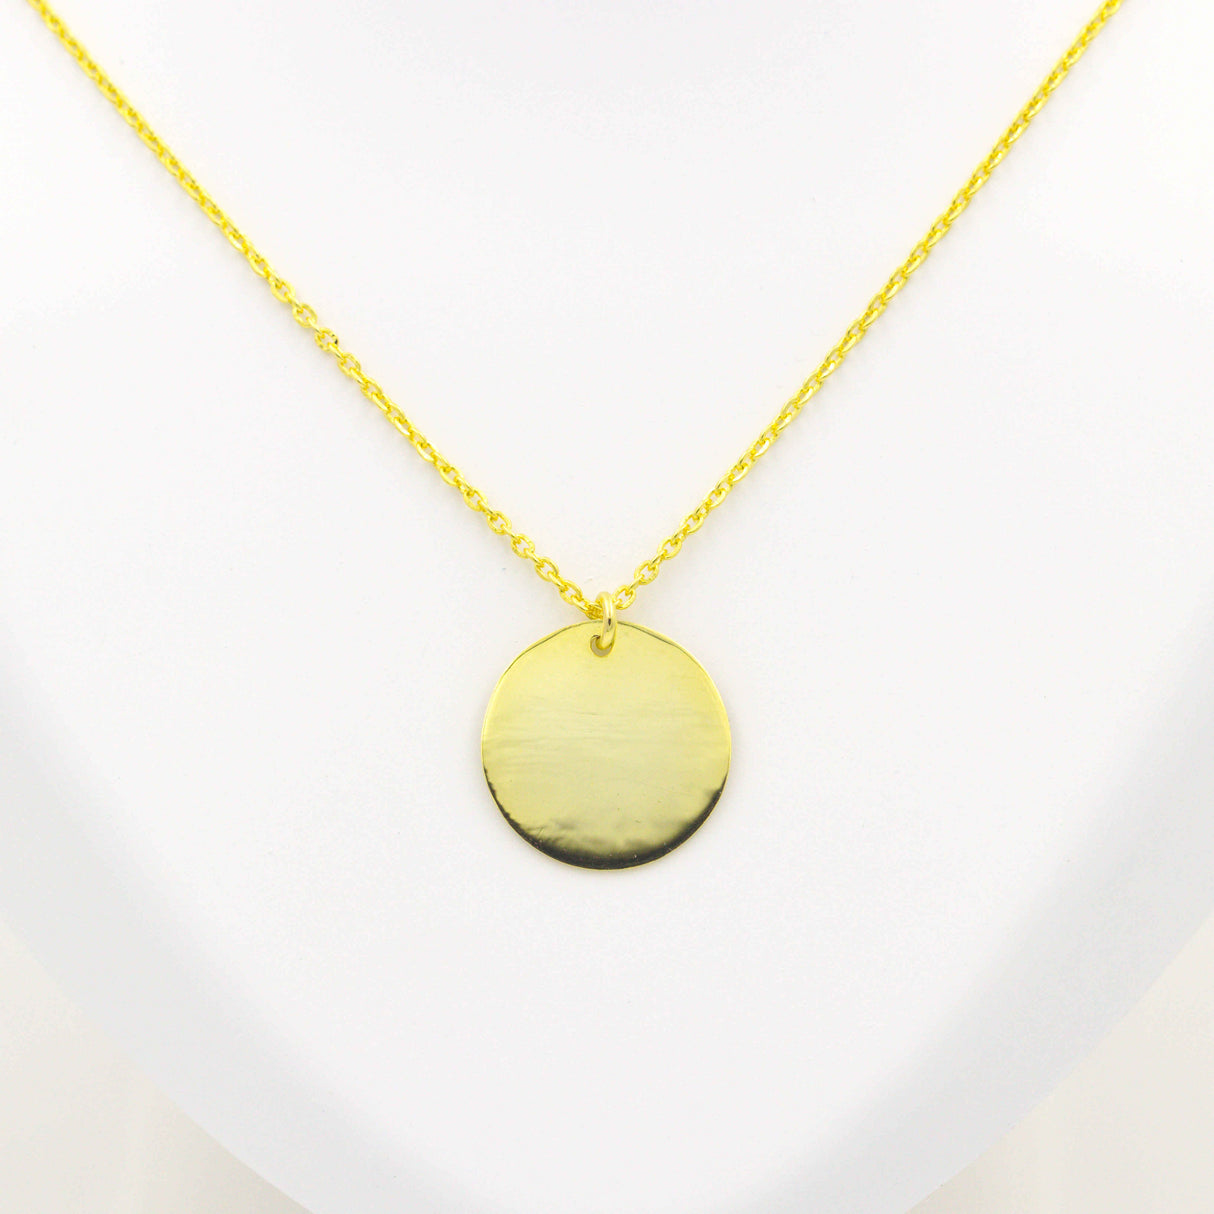 Golden Coin Pendant with Link Chain